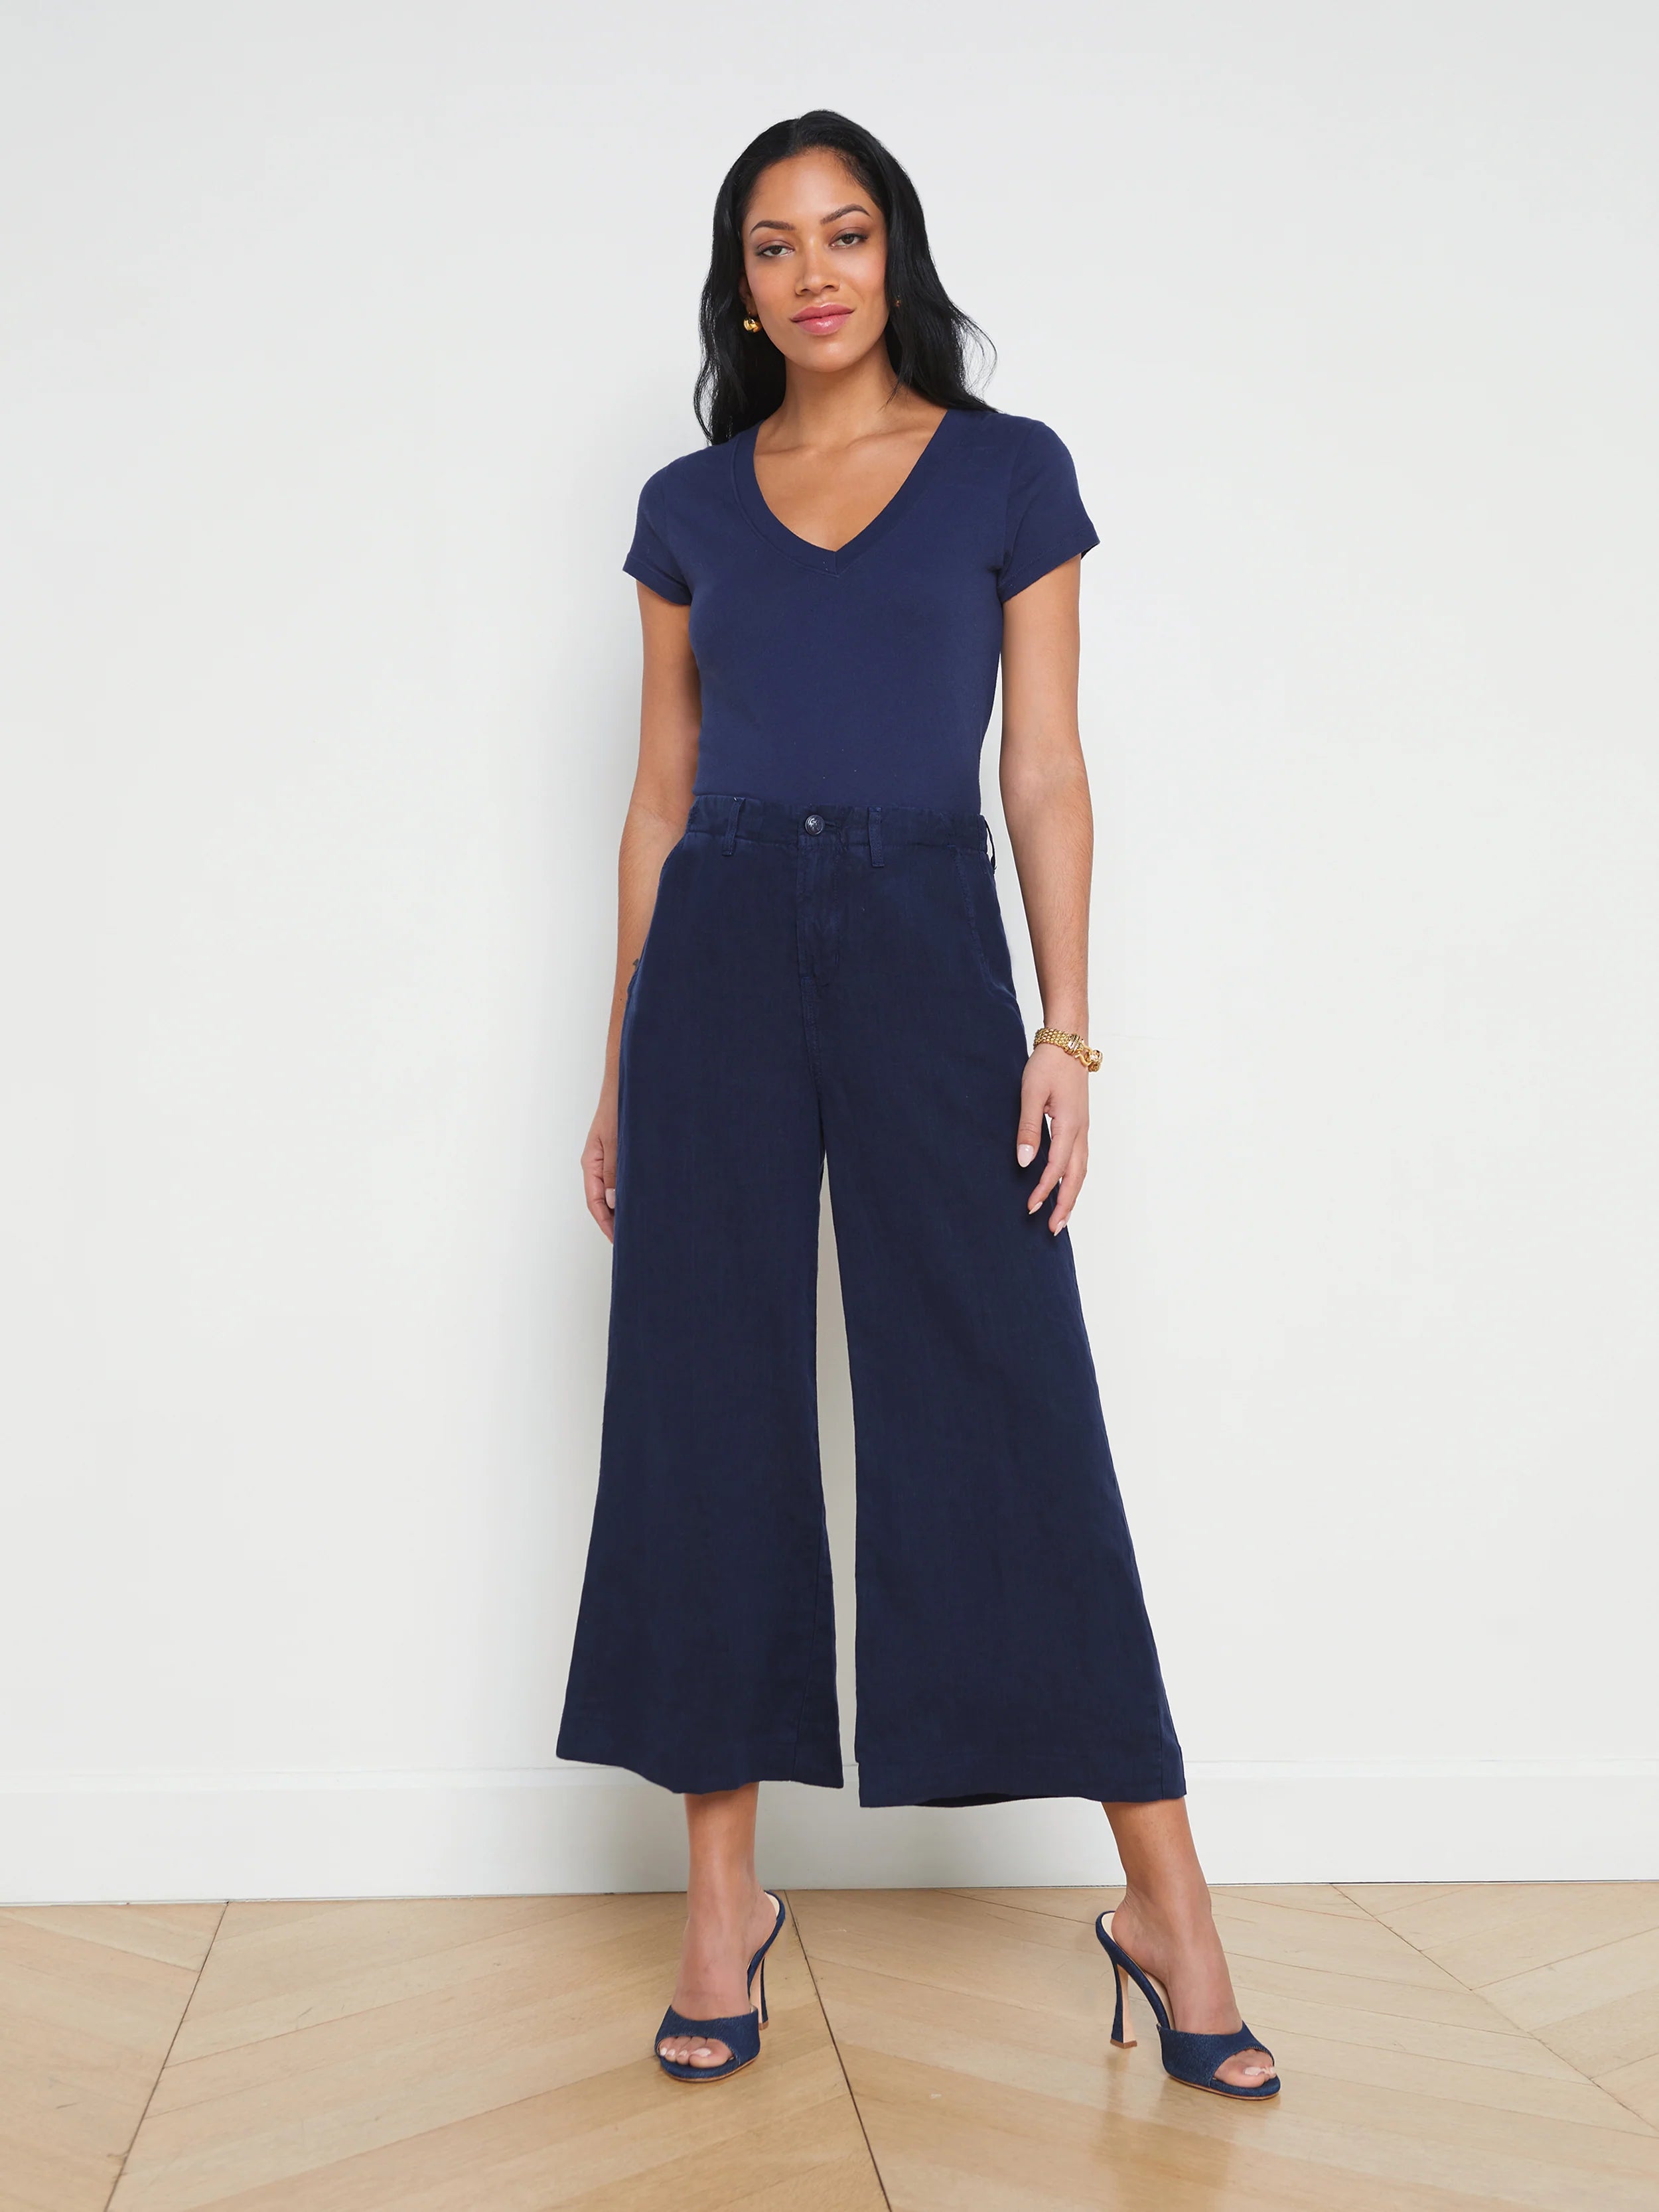 Henderson Linen Cropped Pant